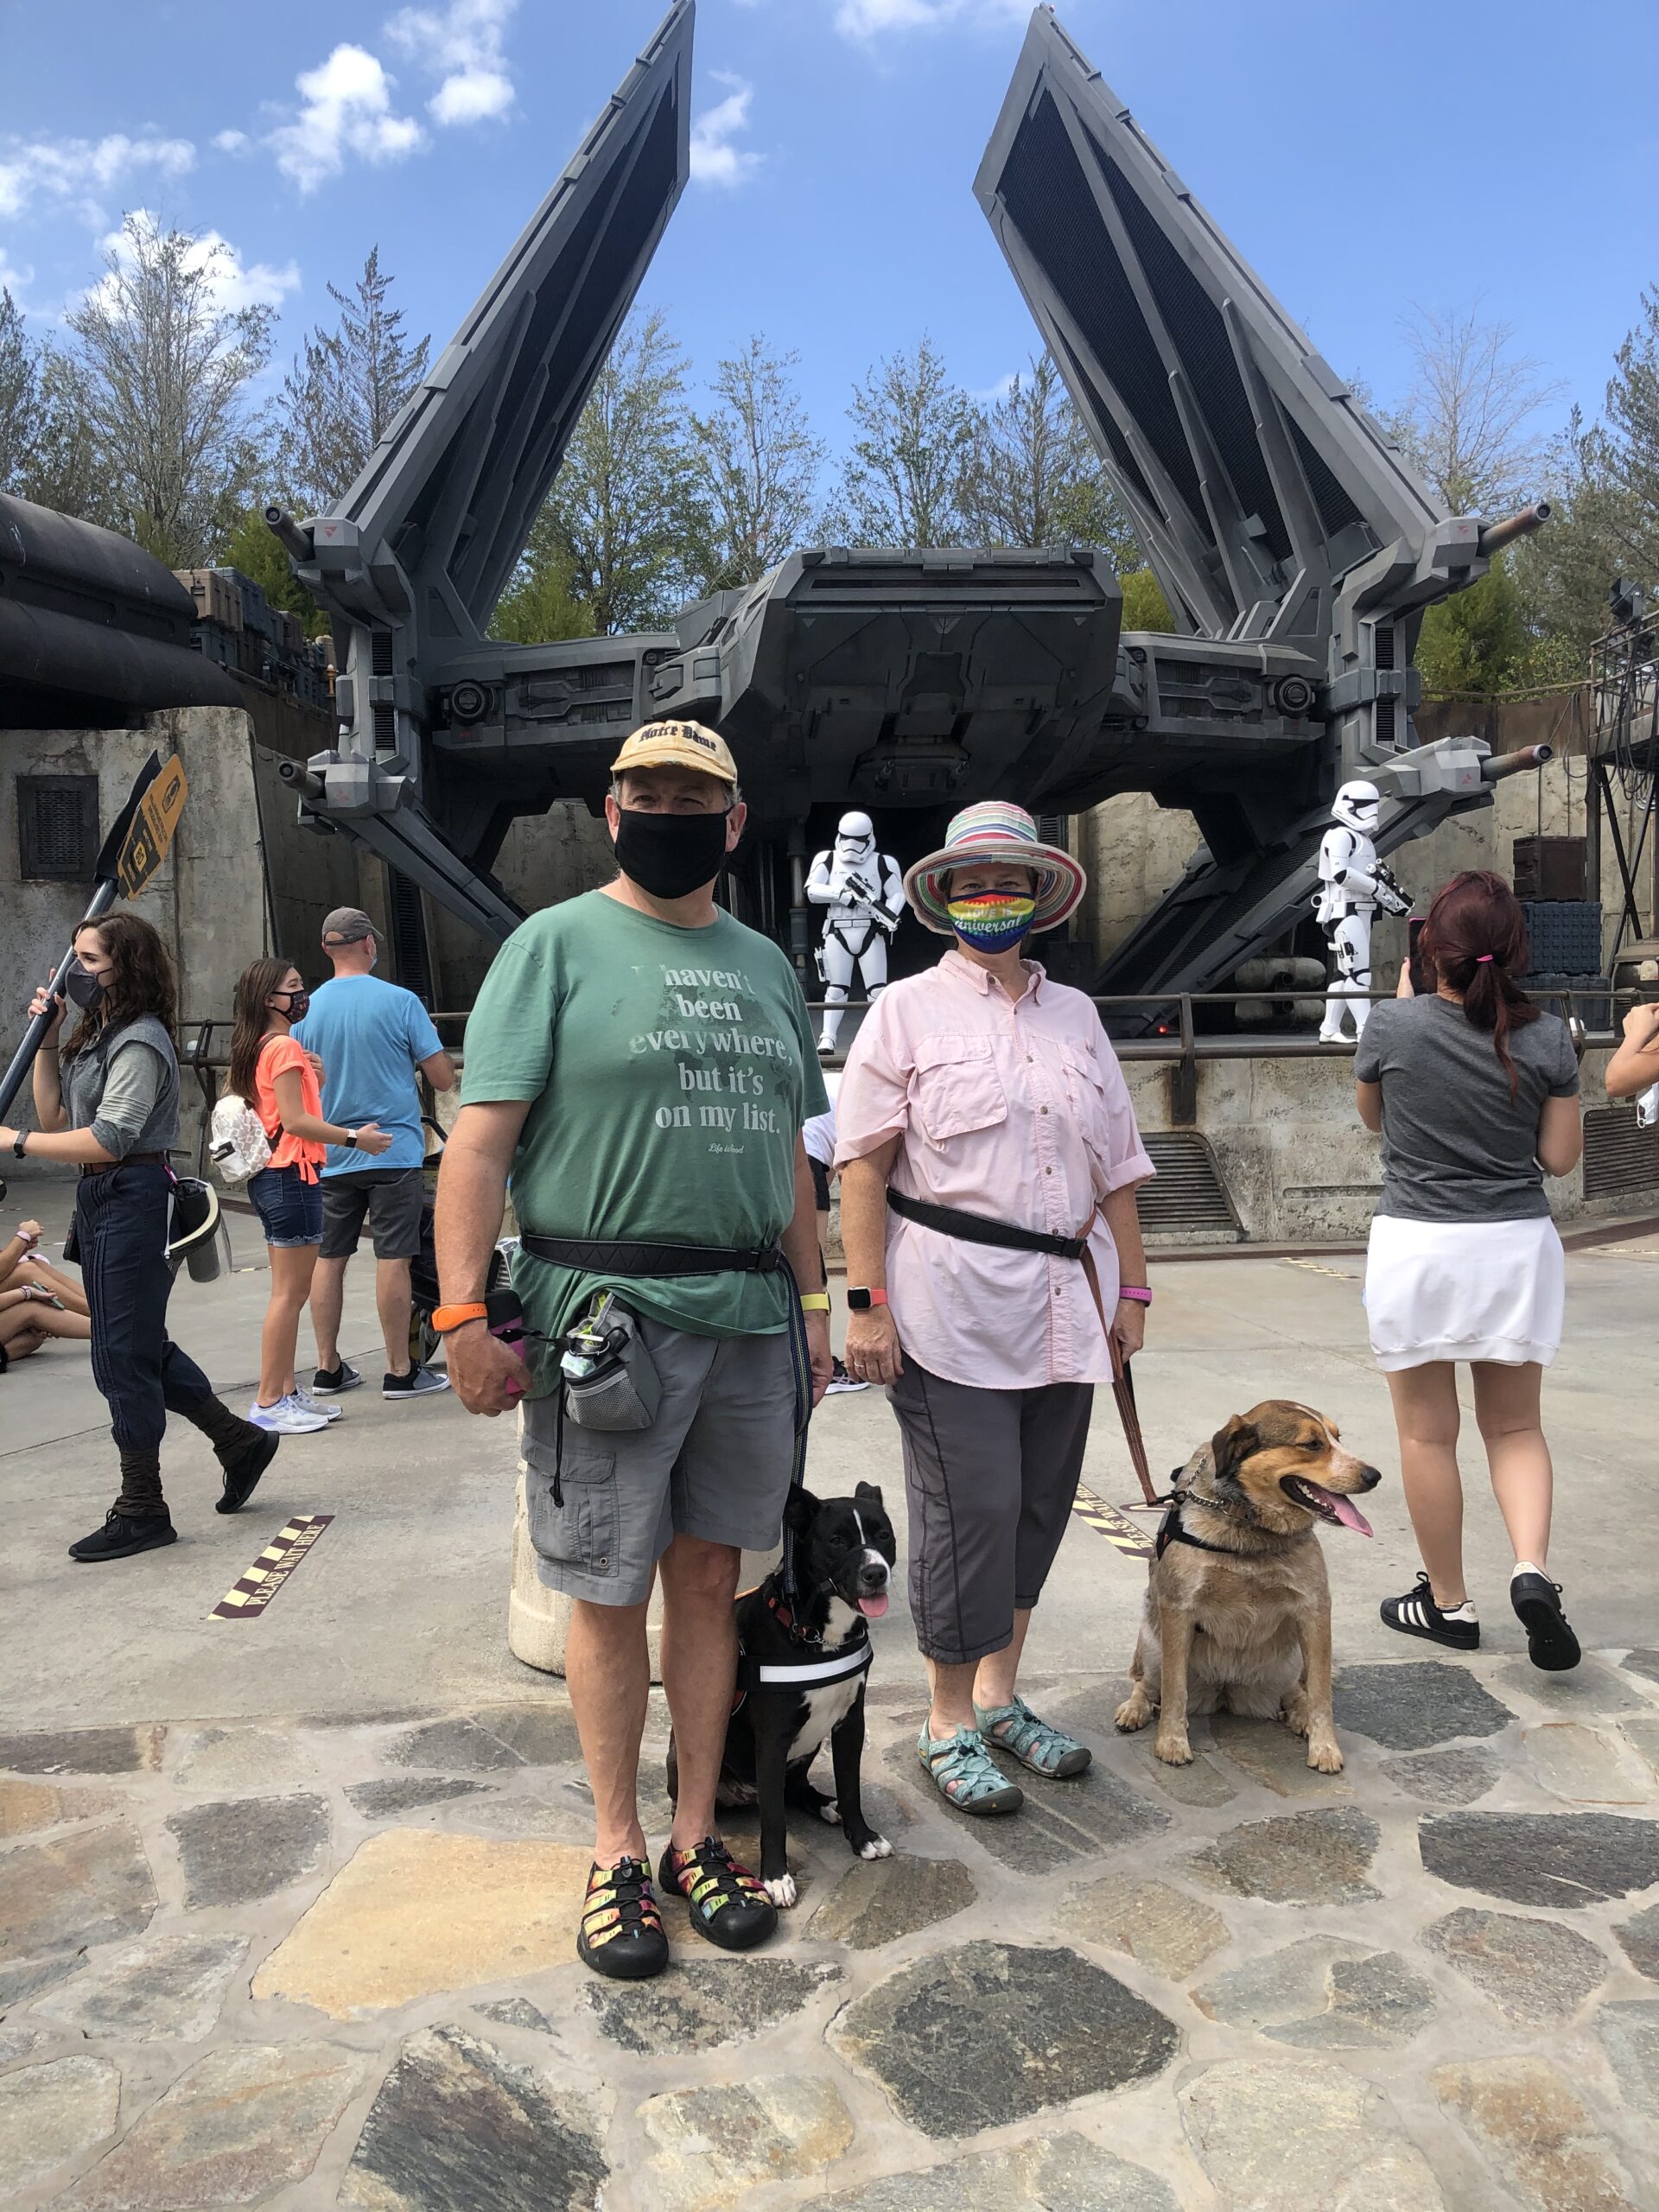 socialization and desensitization with Stormtroopers and TIE fighter